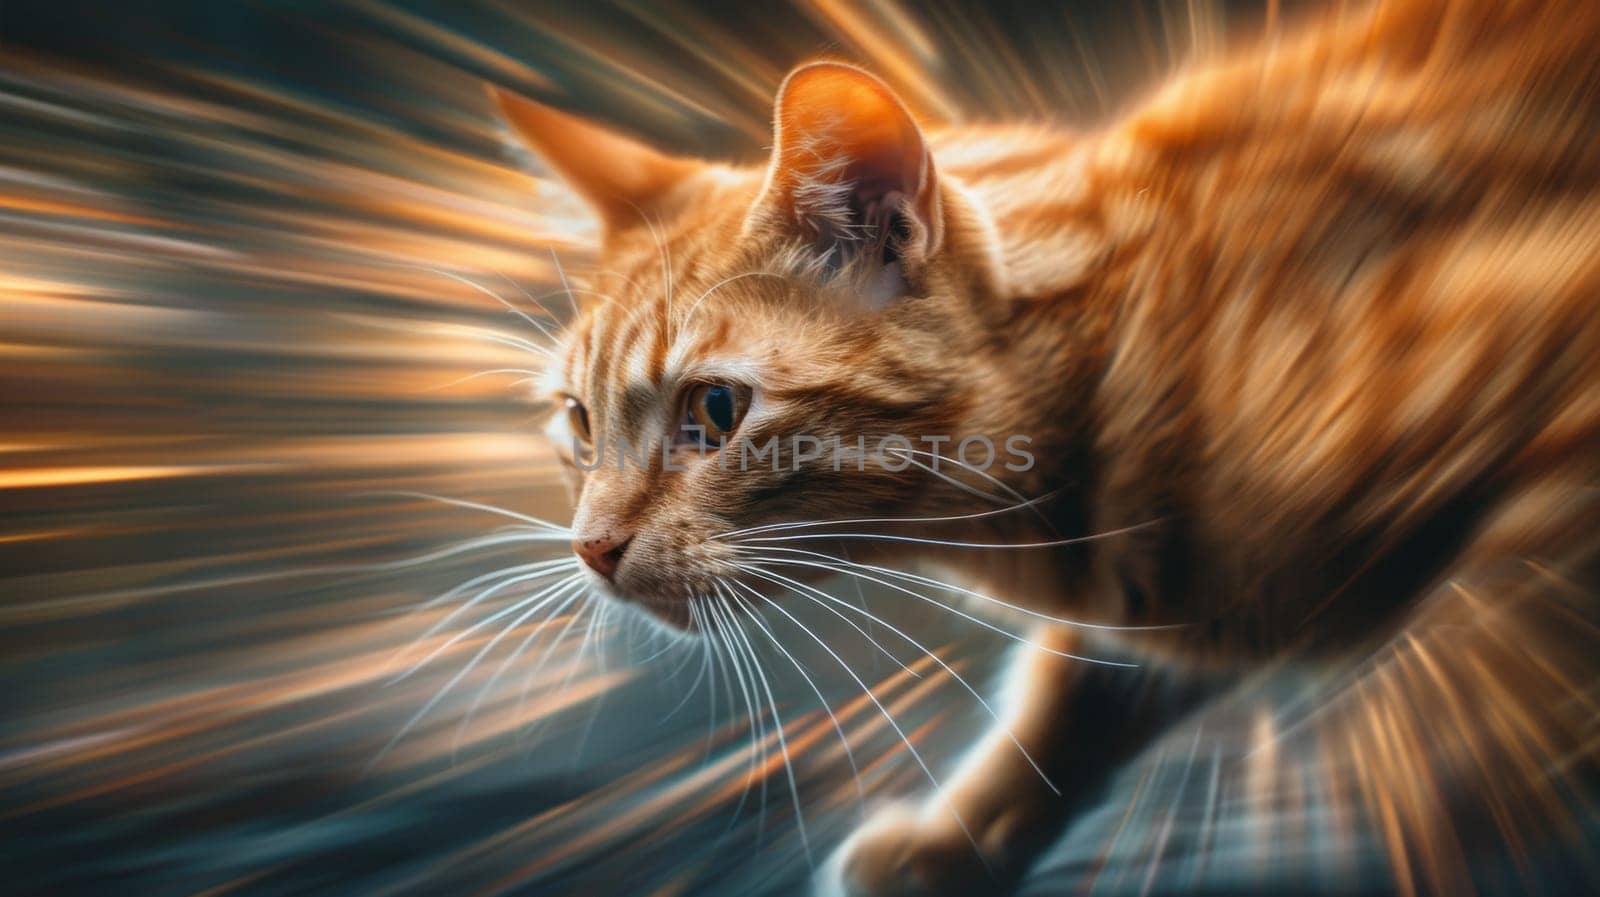 A close up of a cat running in the dark with streaks